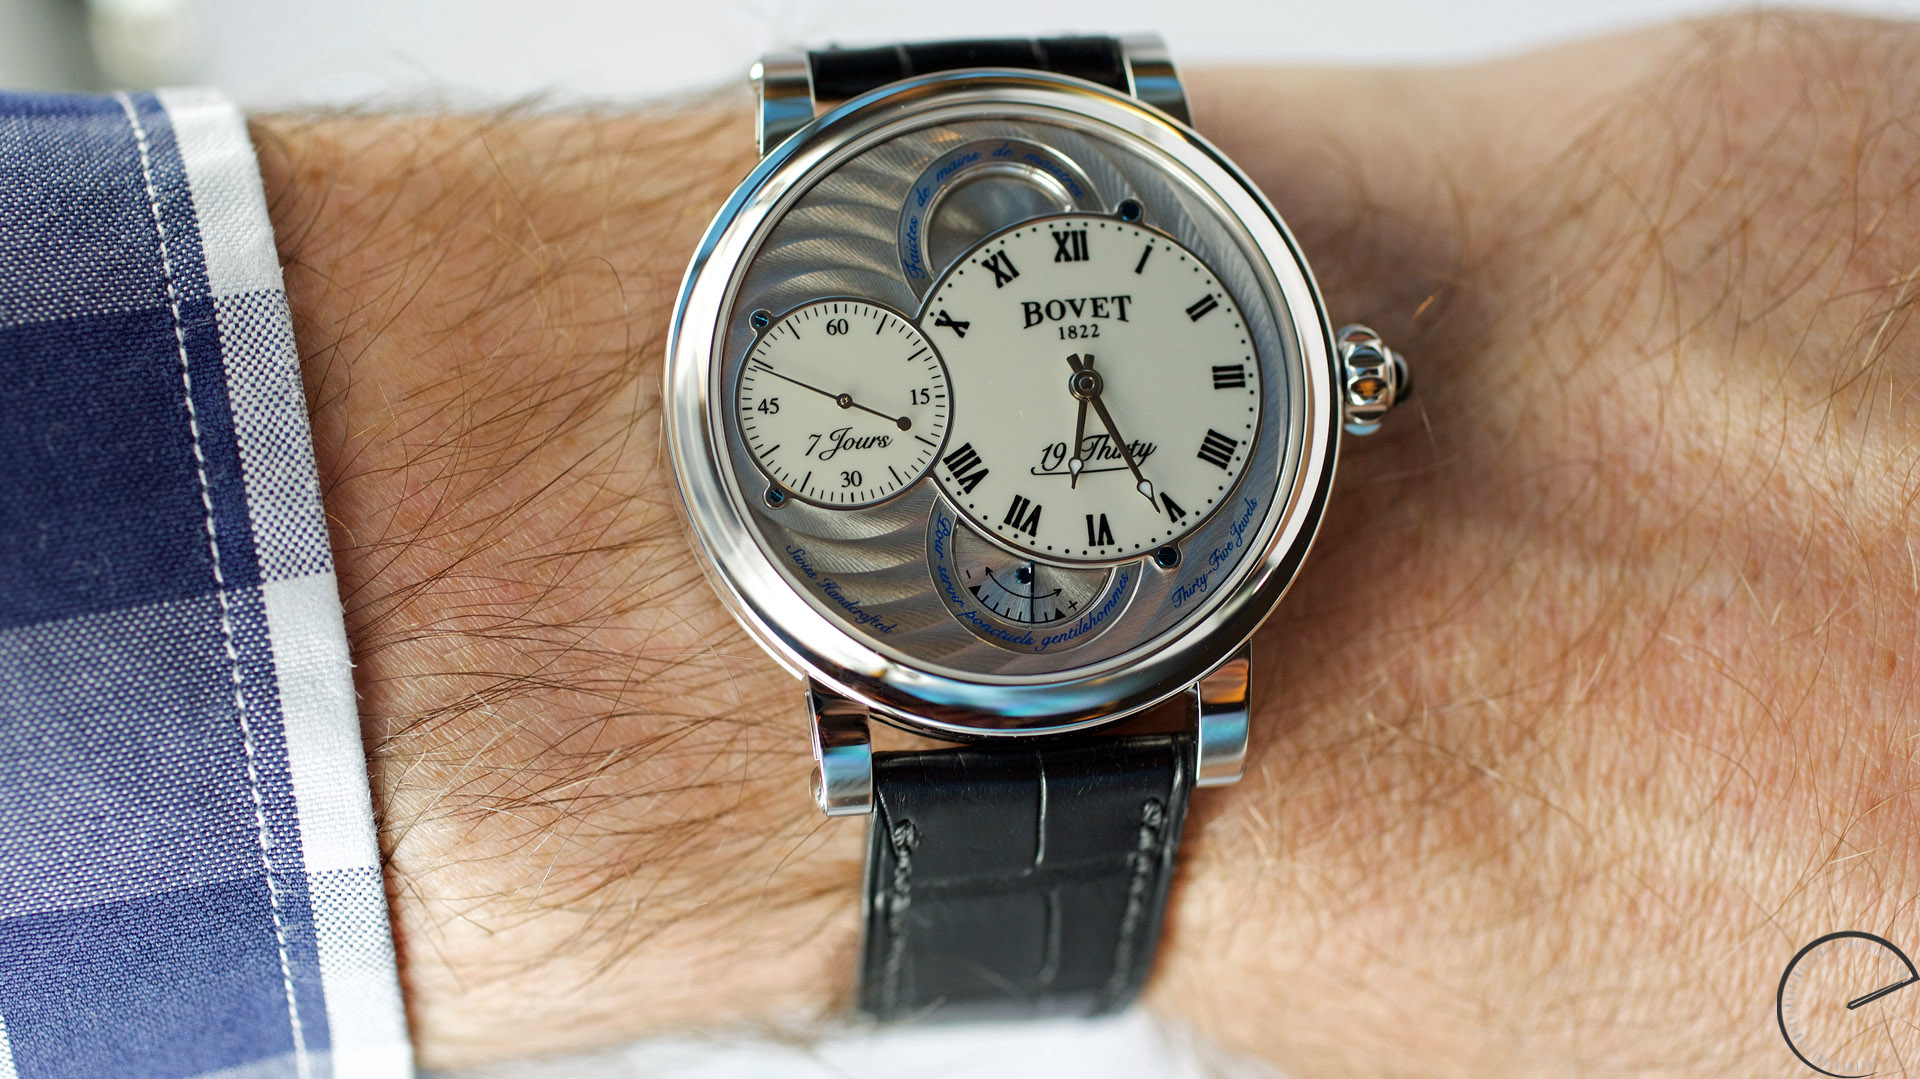 Bovet 19 Thirty with Dimier case - ESCAPEMENT magazine by Angus Davies